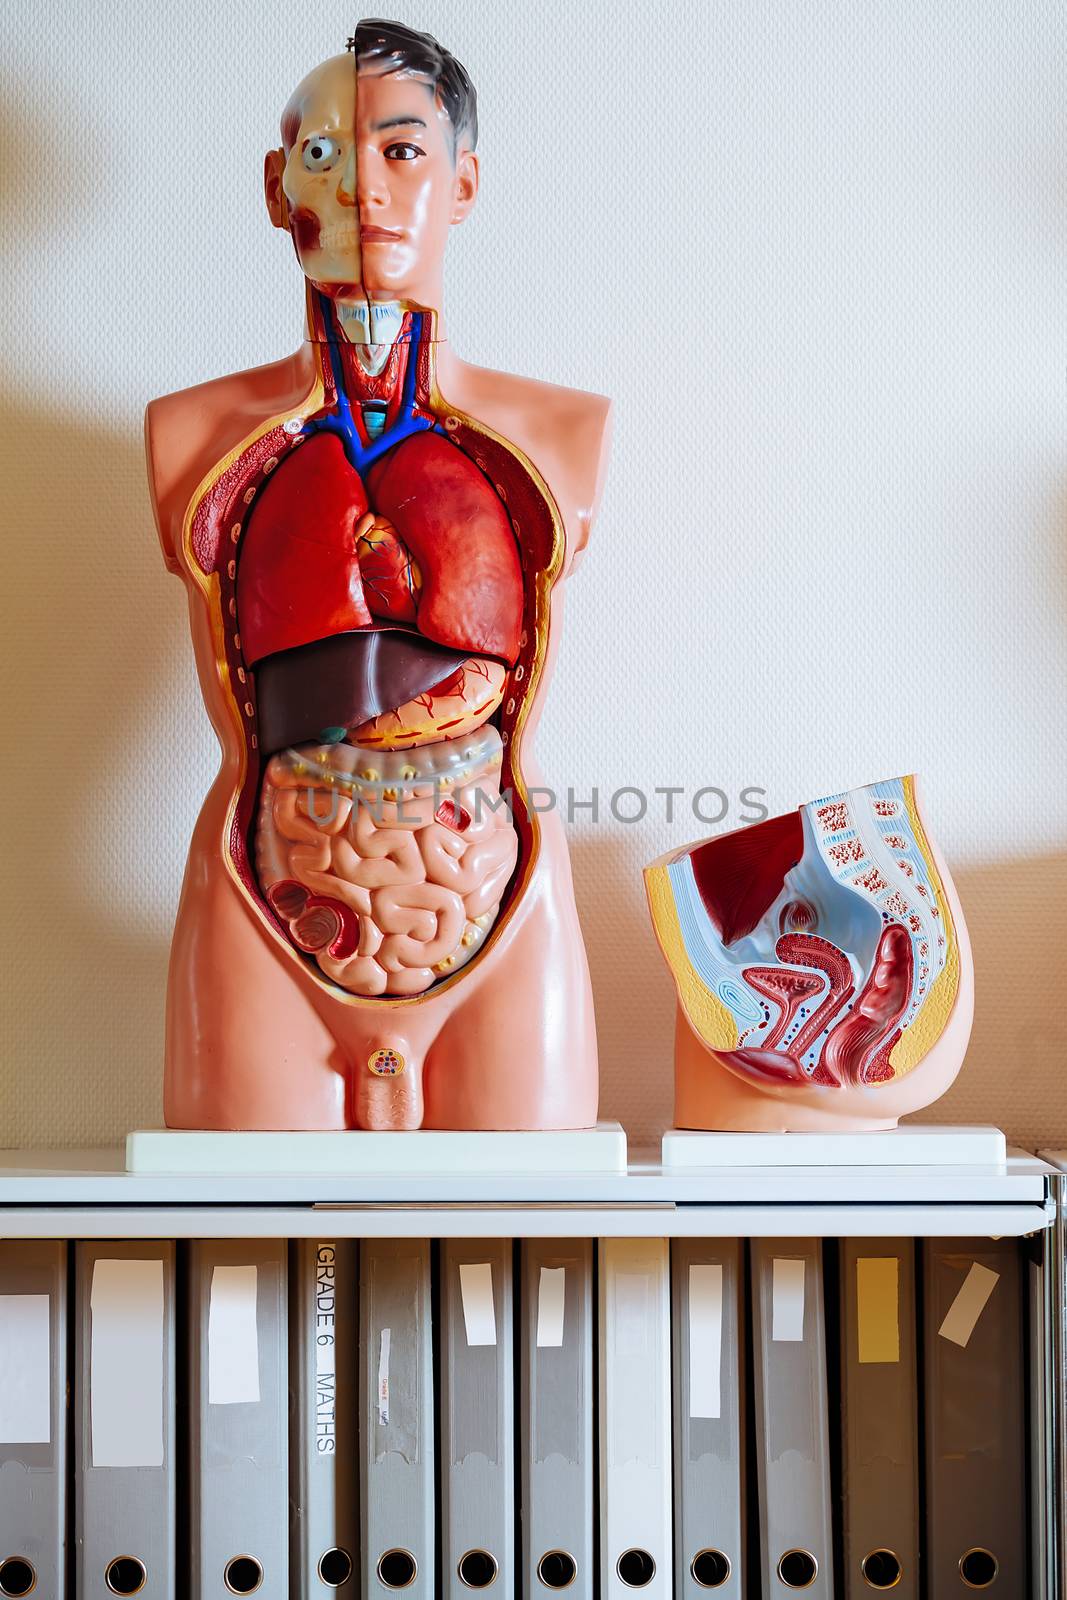 Human anatomical model by sumners